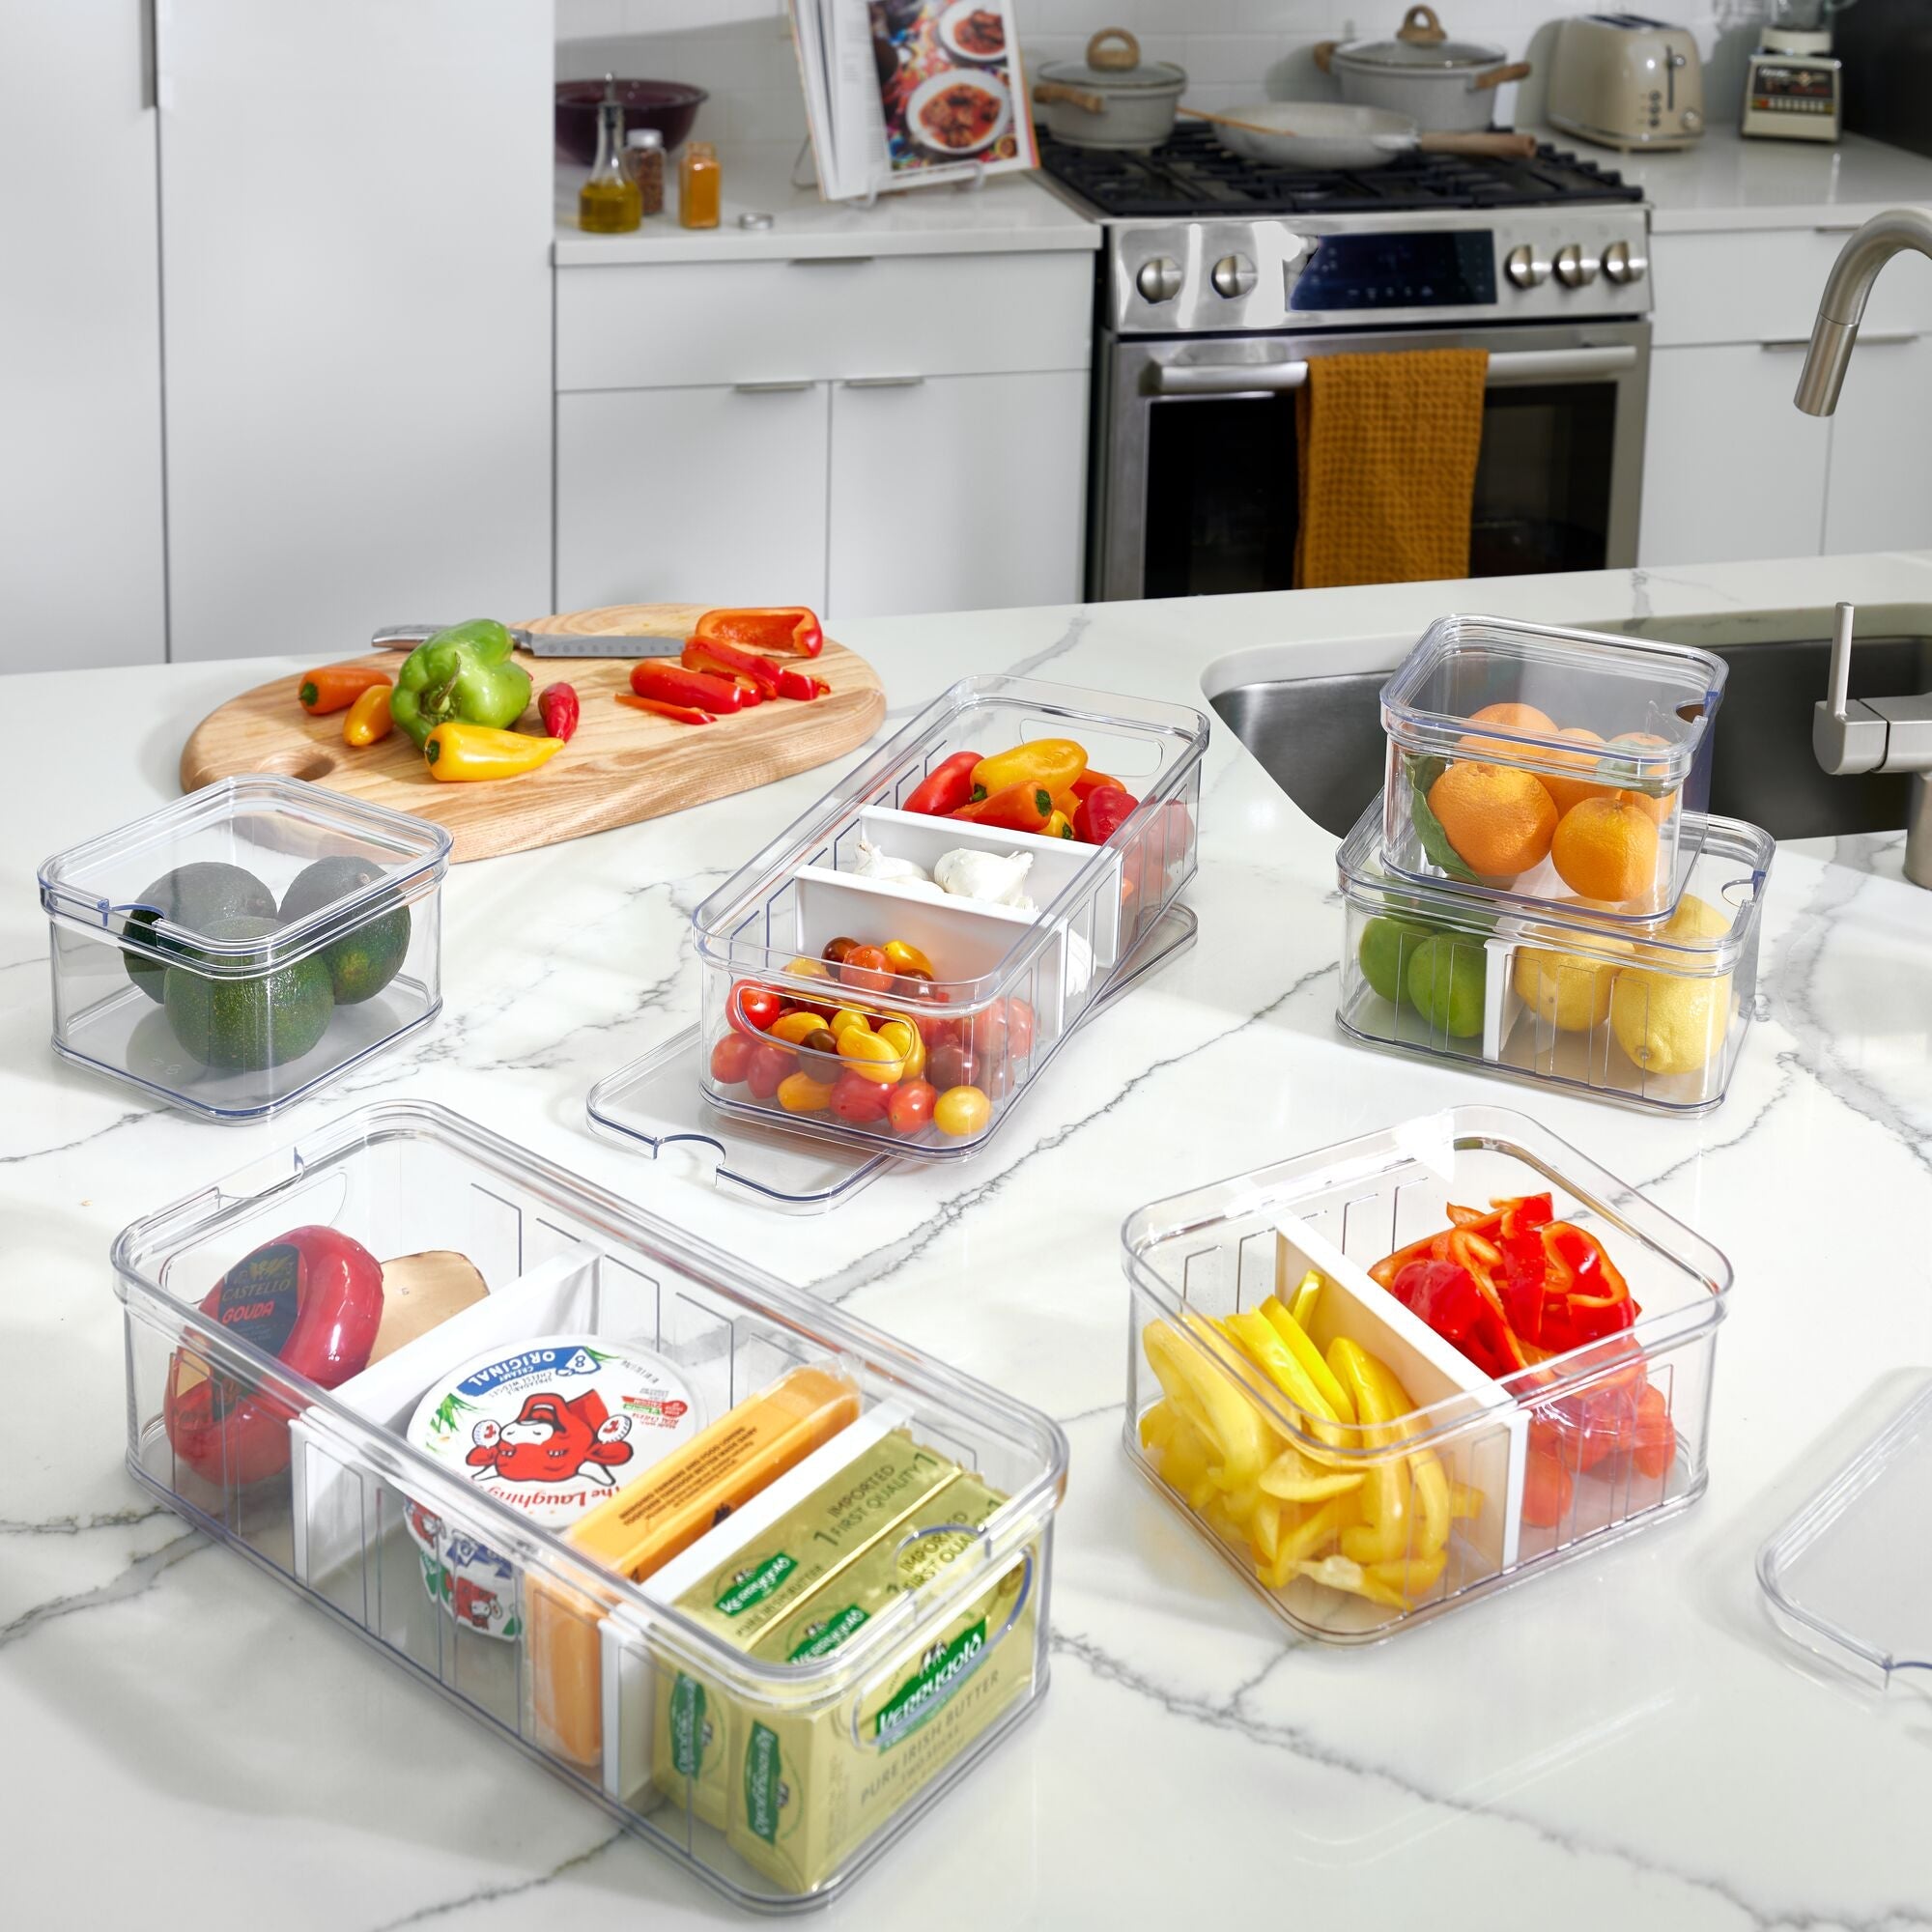 Klear Stackable Fridge Storage Drawers, With Drainer